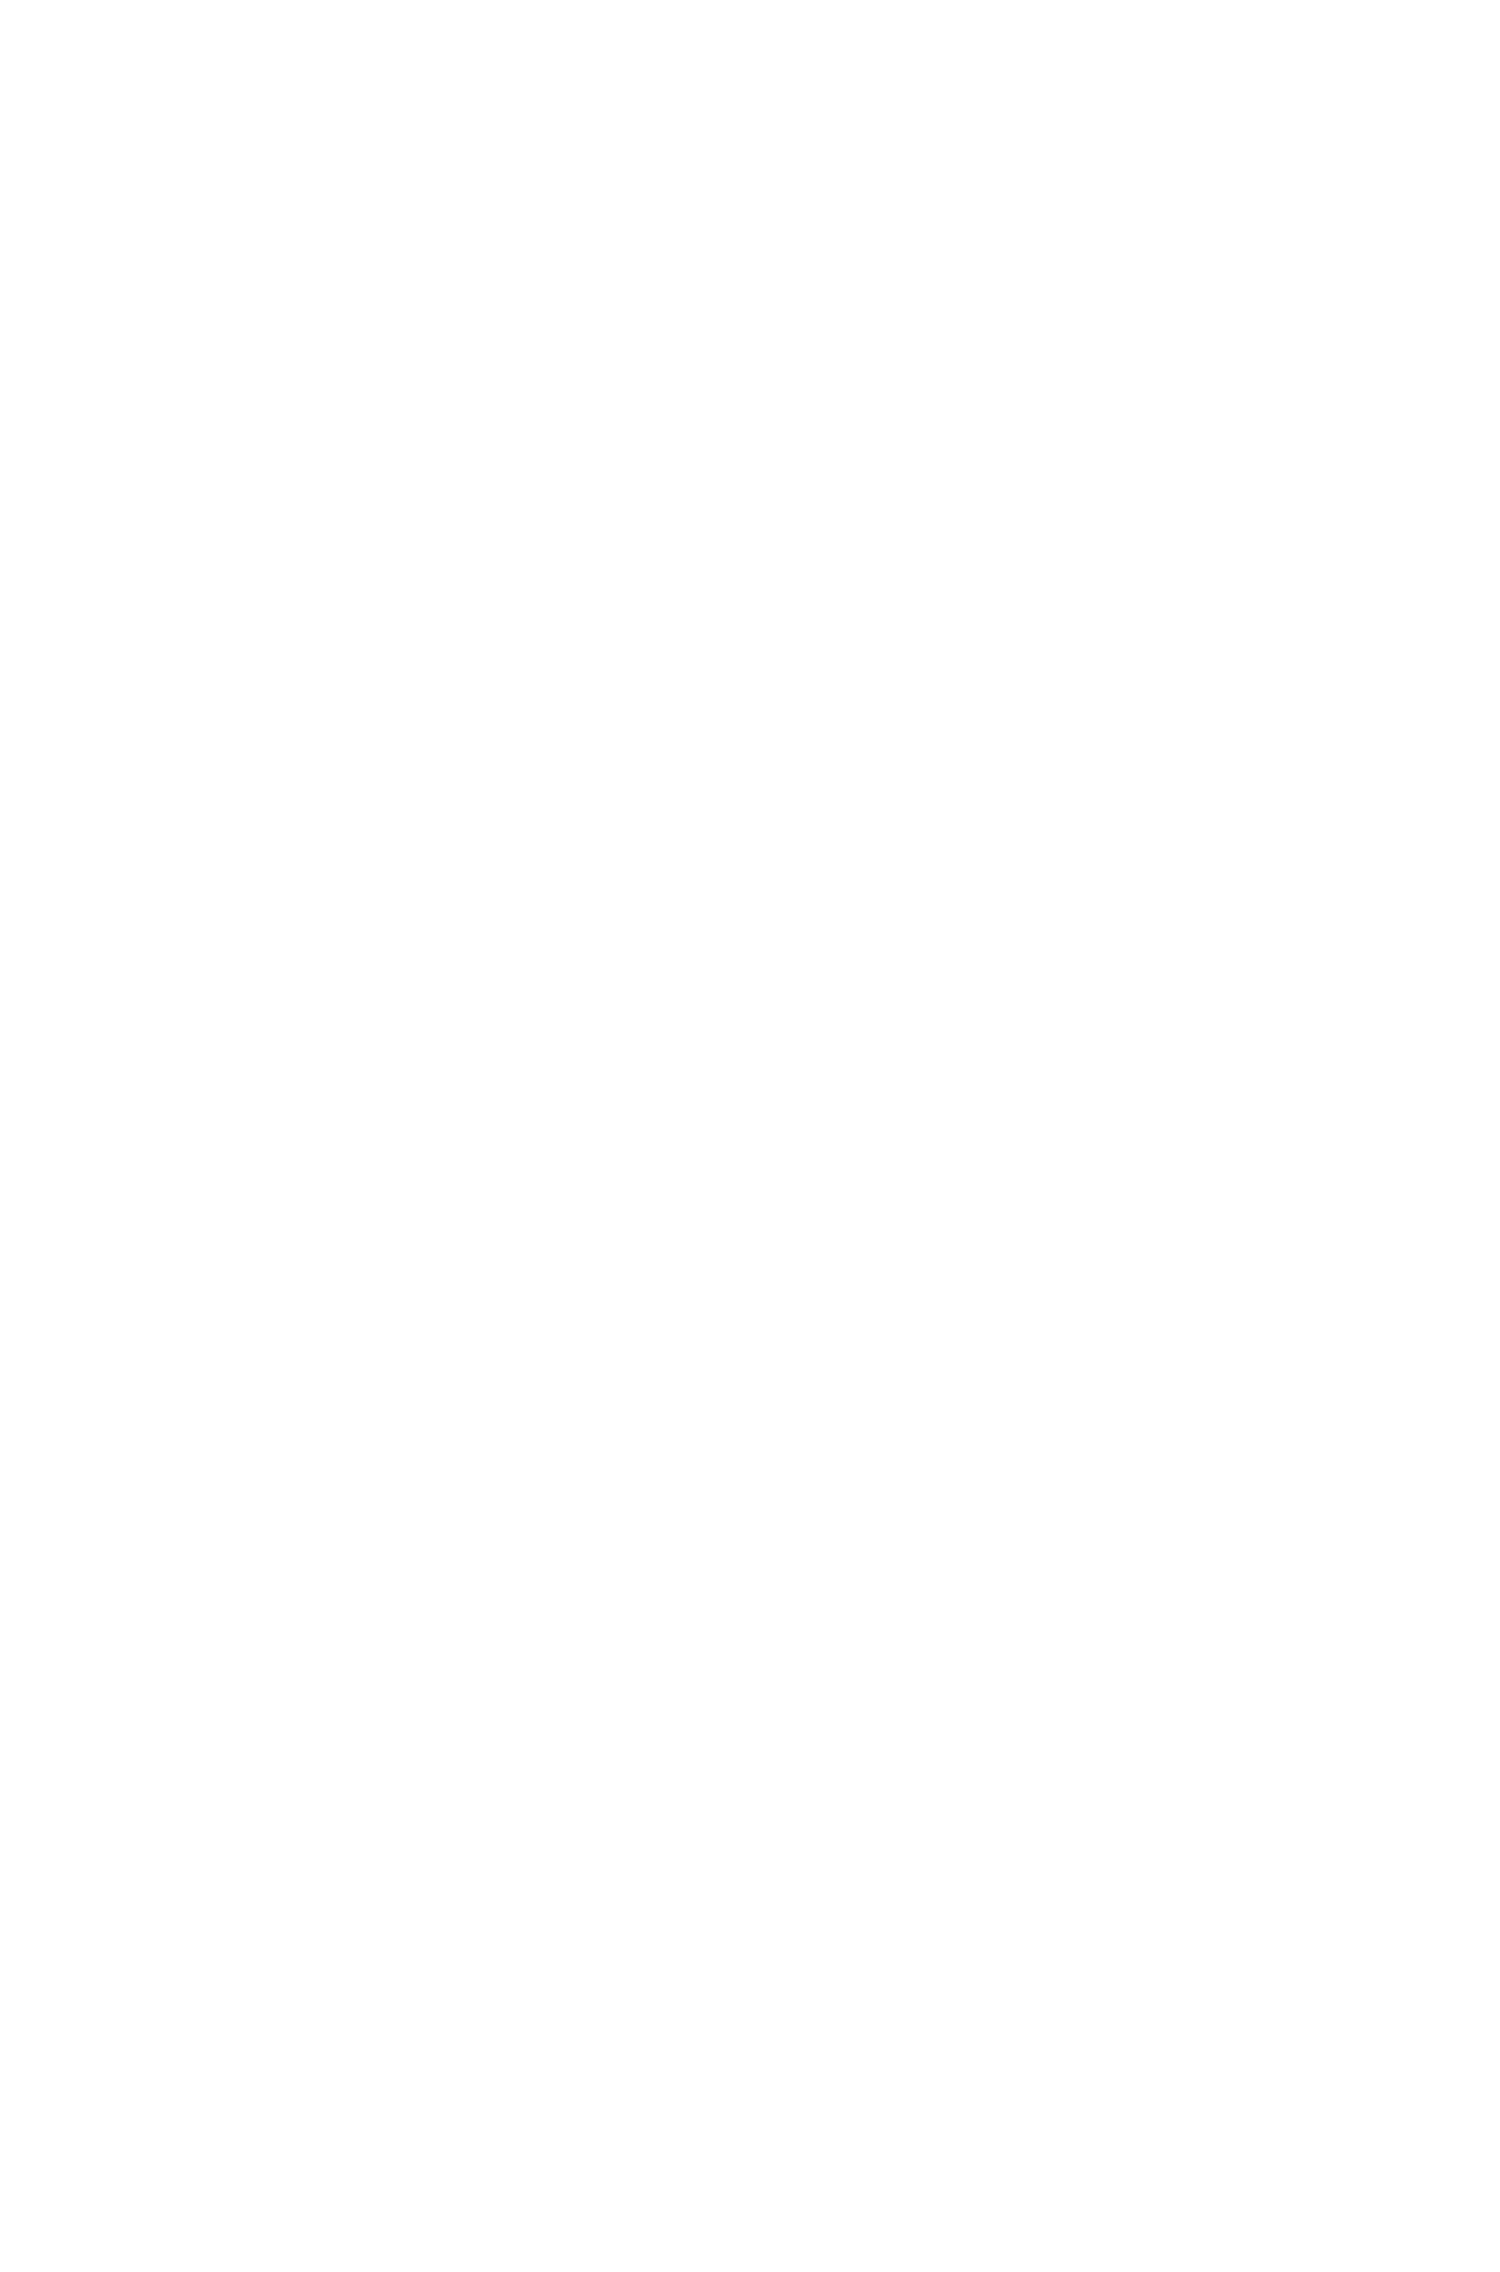 airtouch pace sleeve - 09. 02